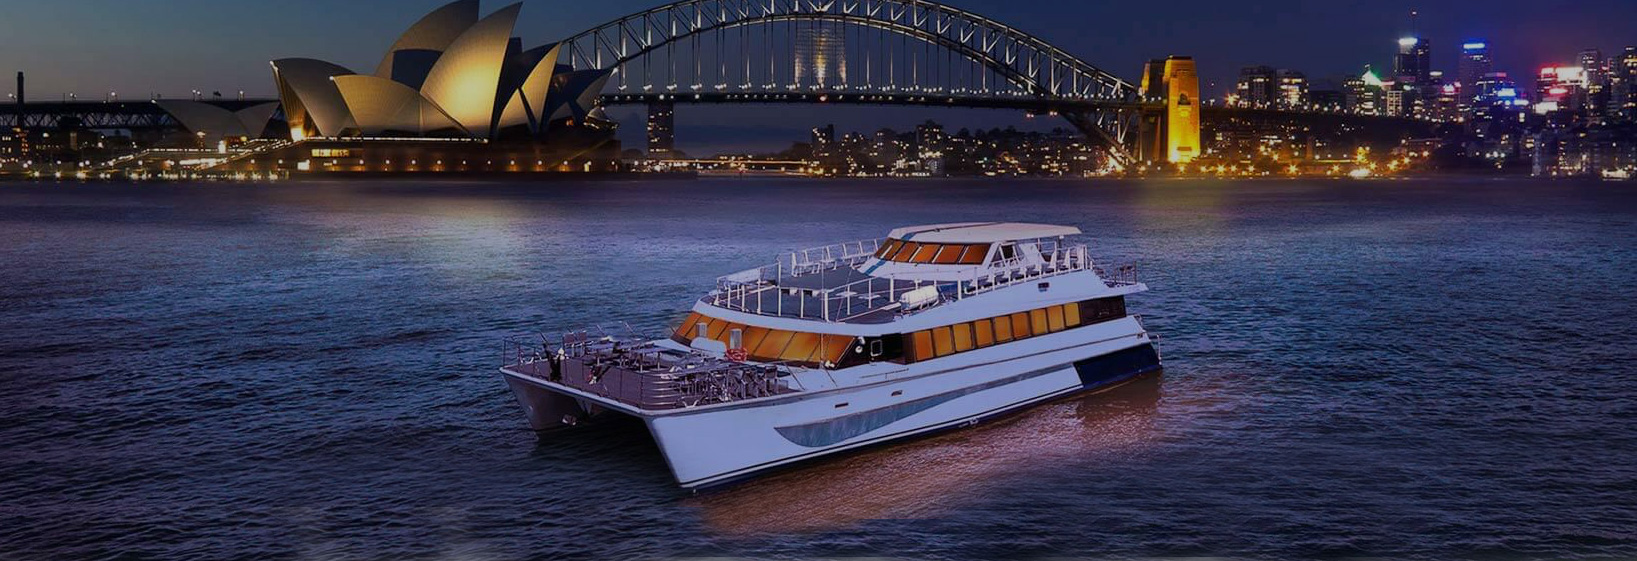 darling harbour cruise dinner